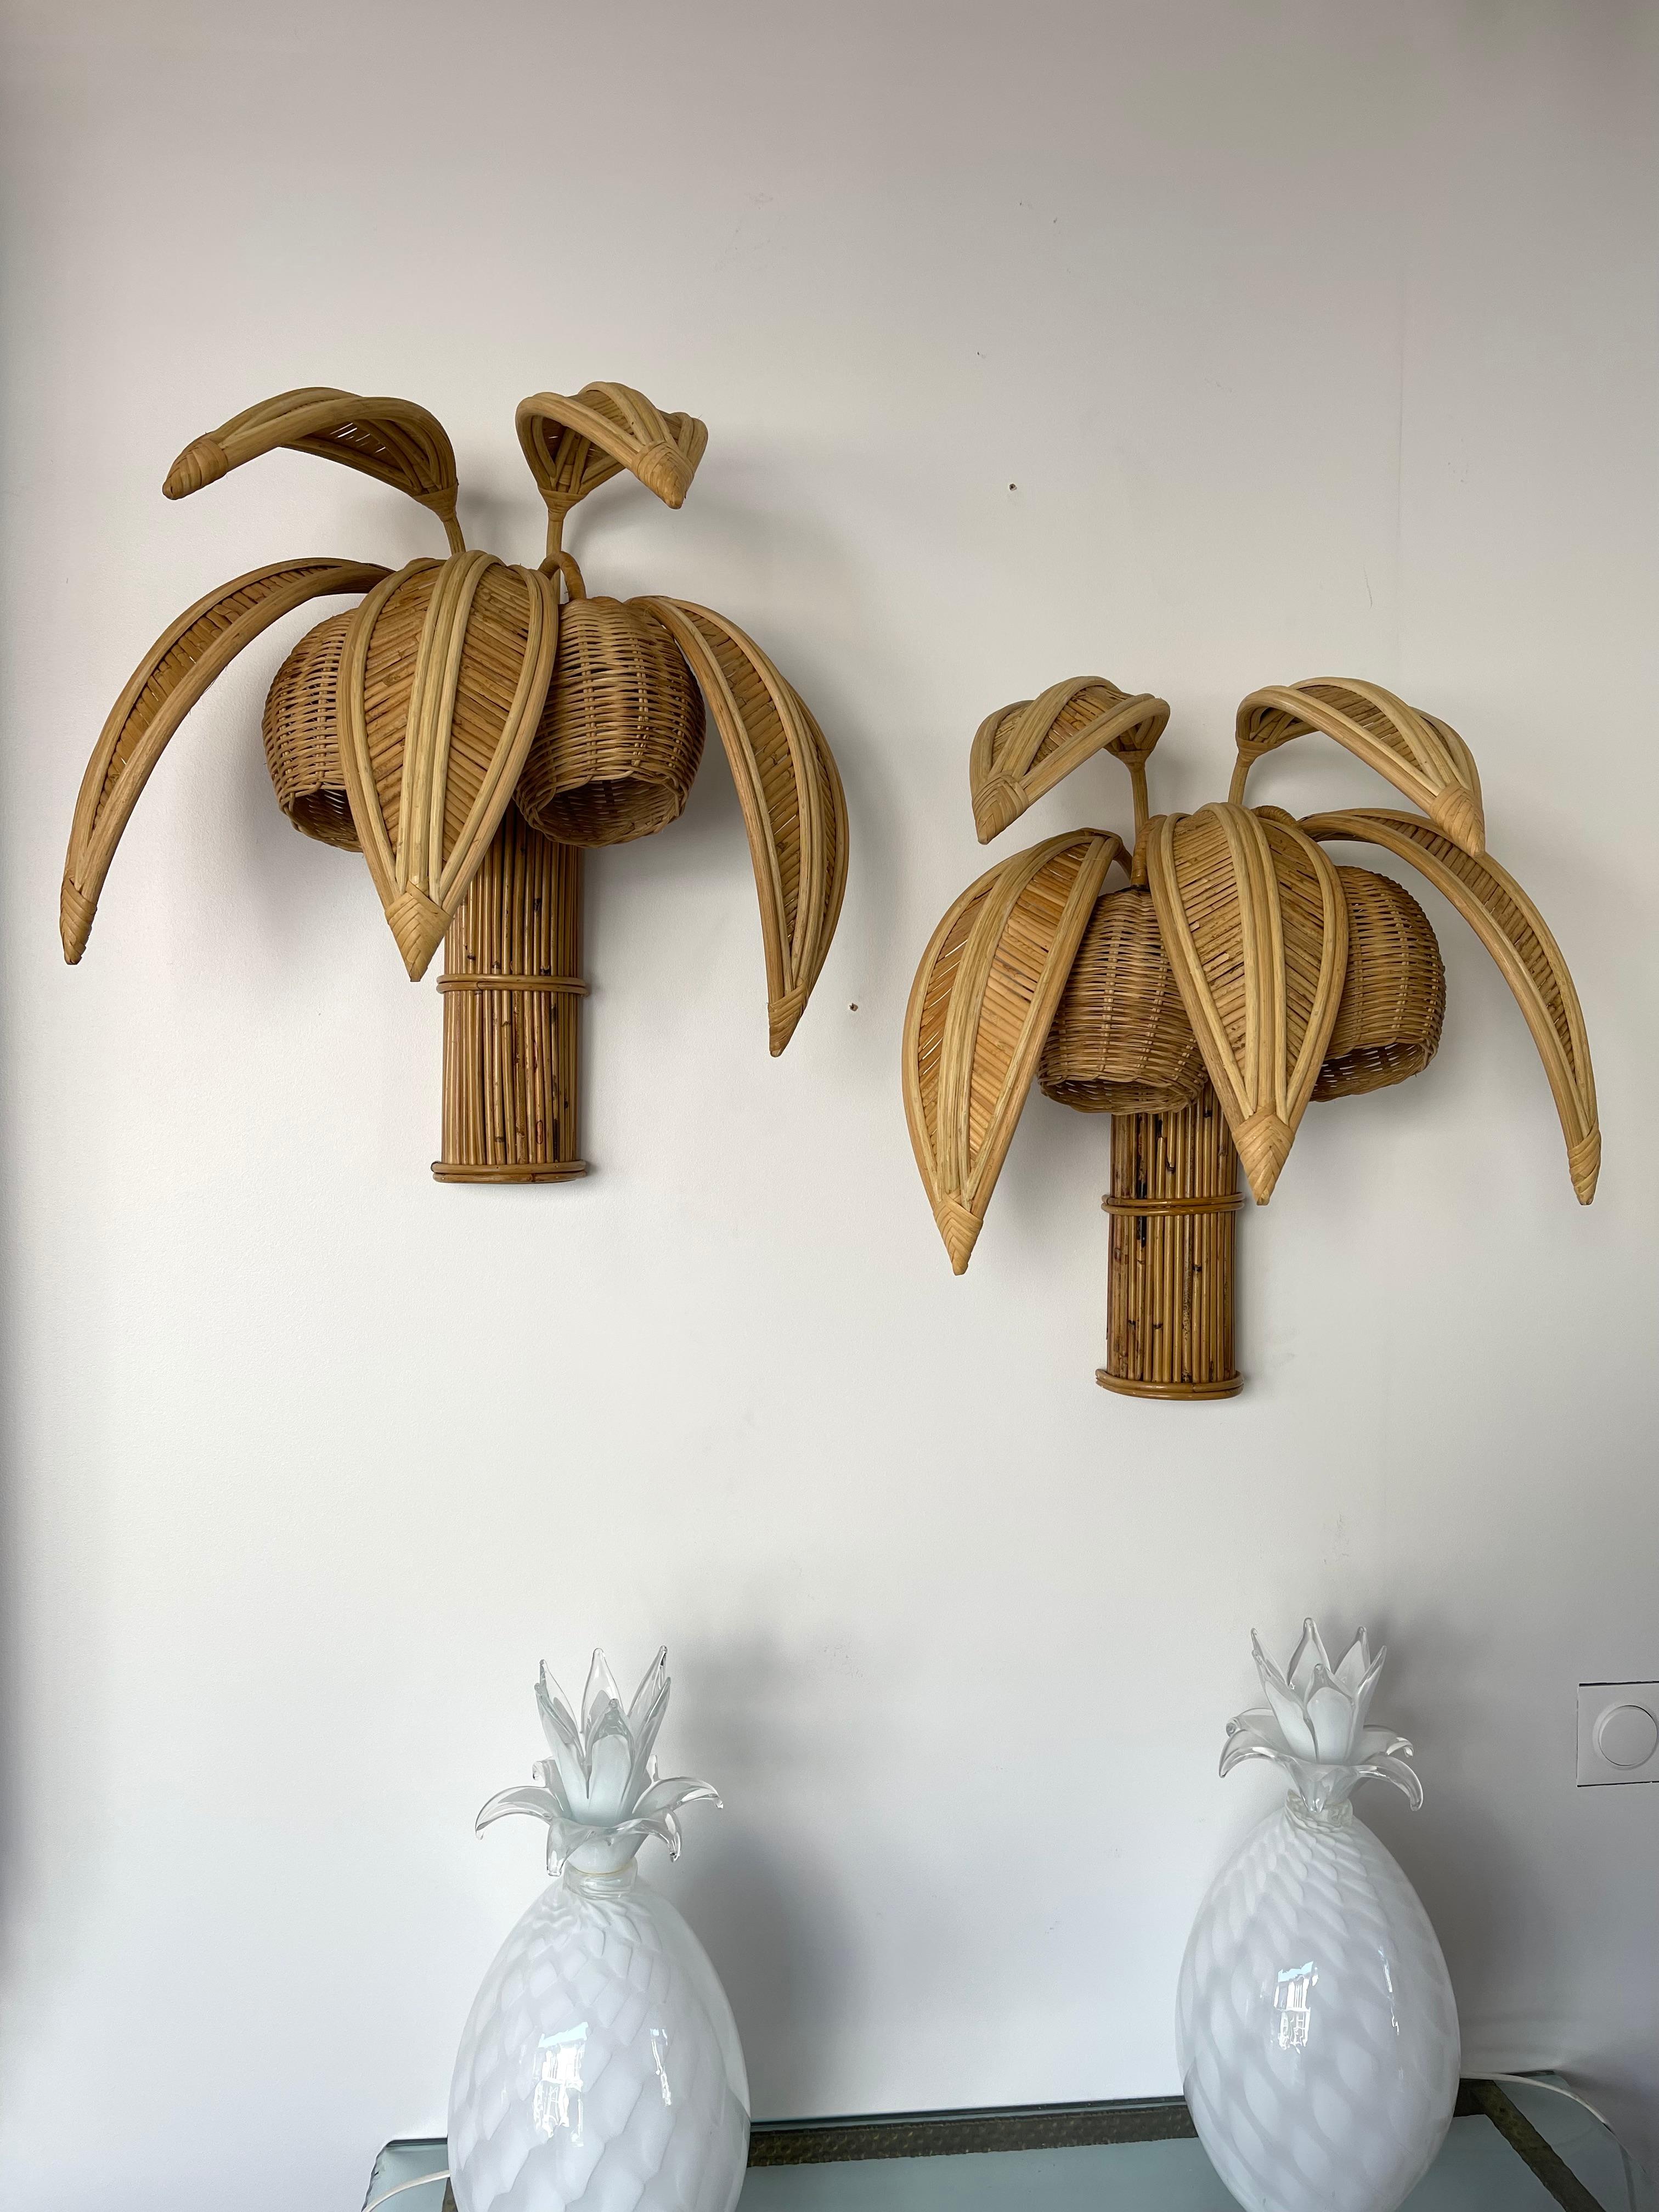 Pair of rattan wicker palm tree coconut sconces wall lights lamps . Artisanal work in the style of Mario Lopez Torres, Galerie Maison & Jardin, Jansen, Dal Vera, Vivai Del Sud, Hollywood Regency.